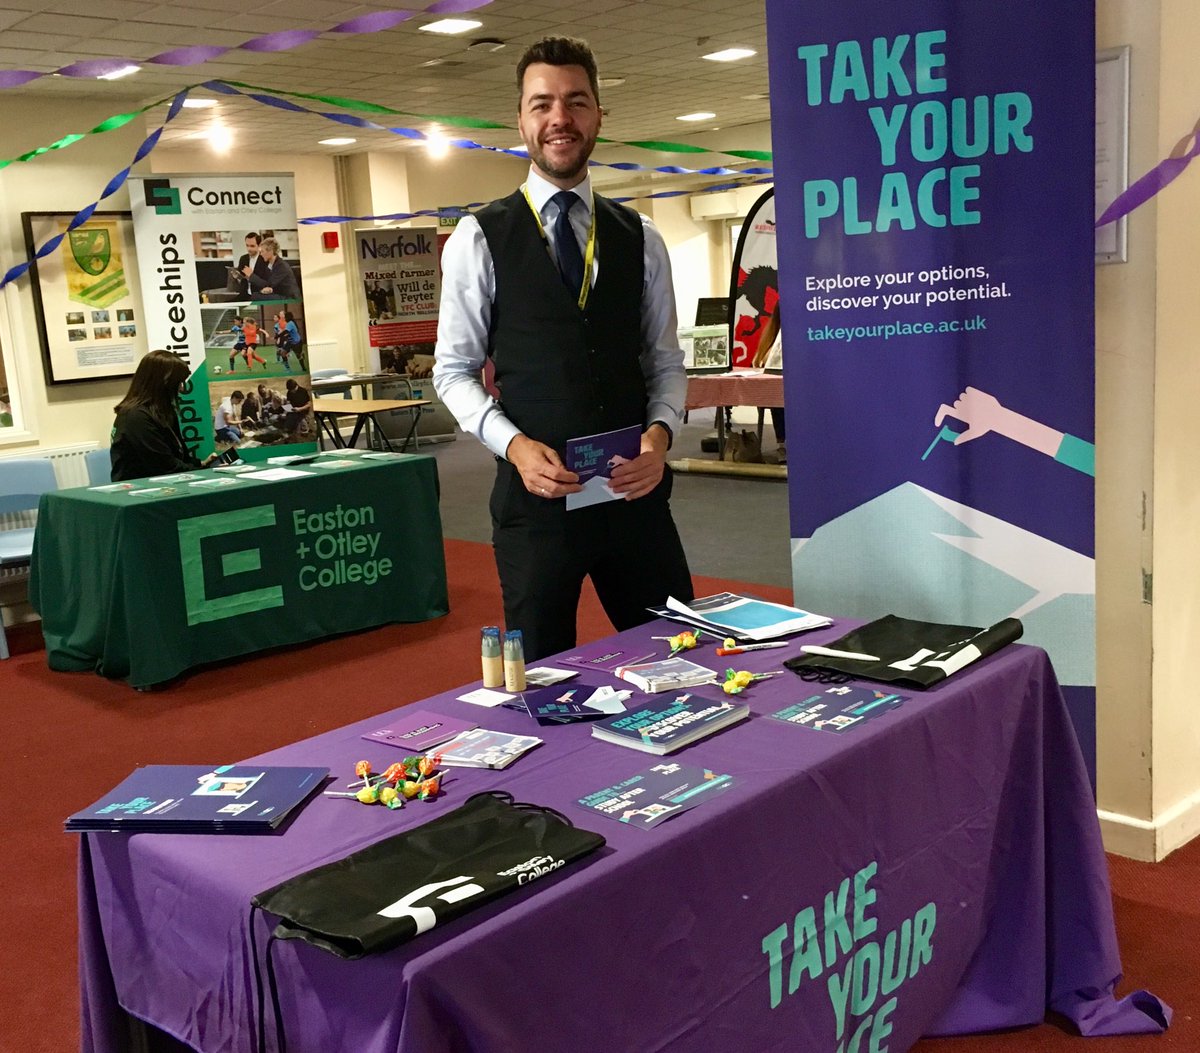 Great to catch up (briefly) with the lovely ⁦@NEACO_DANIEL⁩ ⁦@TakeYourPlaceHE⁩ inspiring young people ⁦@EastonOtley⁩ to #DreamBig and consider exciting opportunities of #HigherEducation #AchieveYourFullPotential